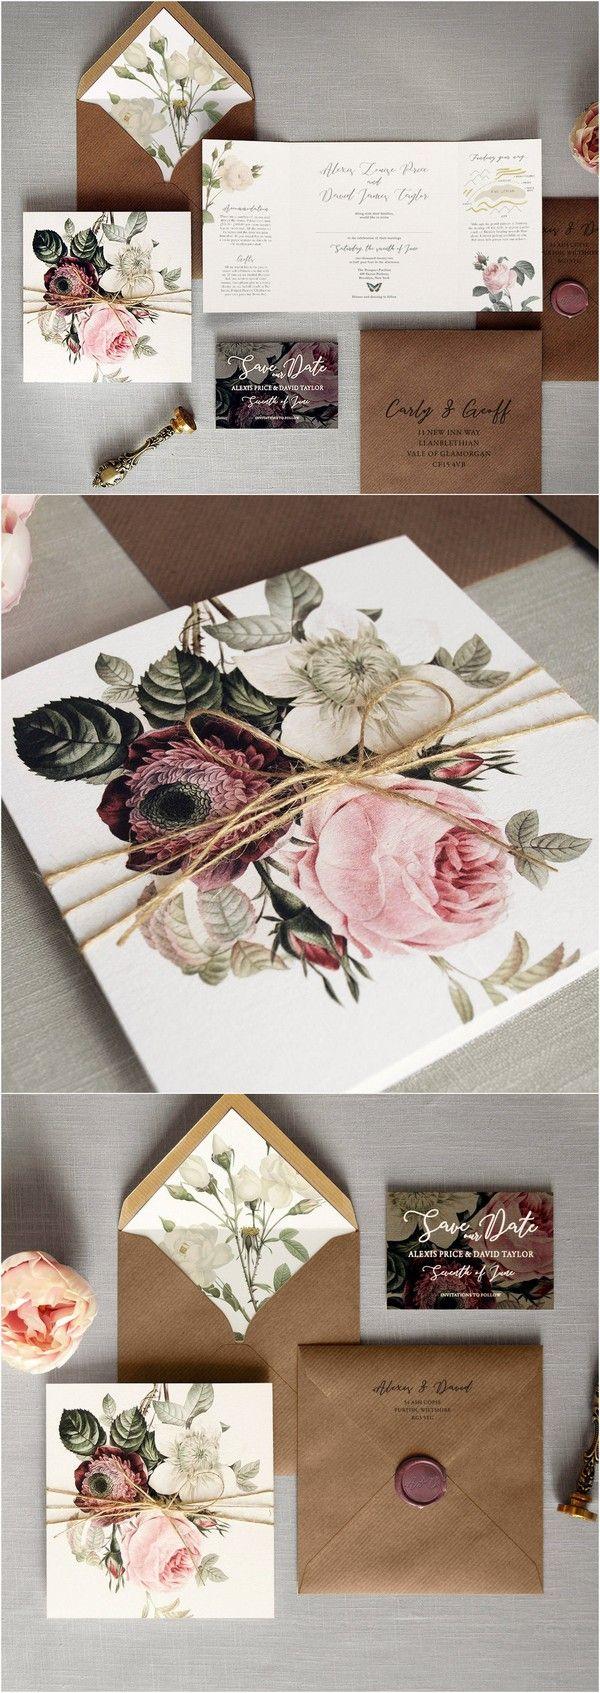 Mariage - Top 10 Wedding Invitations We Love From ETSY For 2018 - Page 2 Of 2